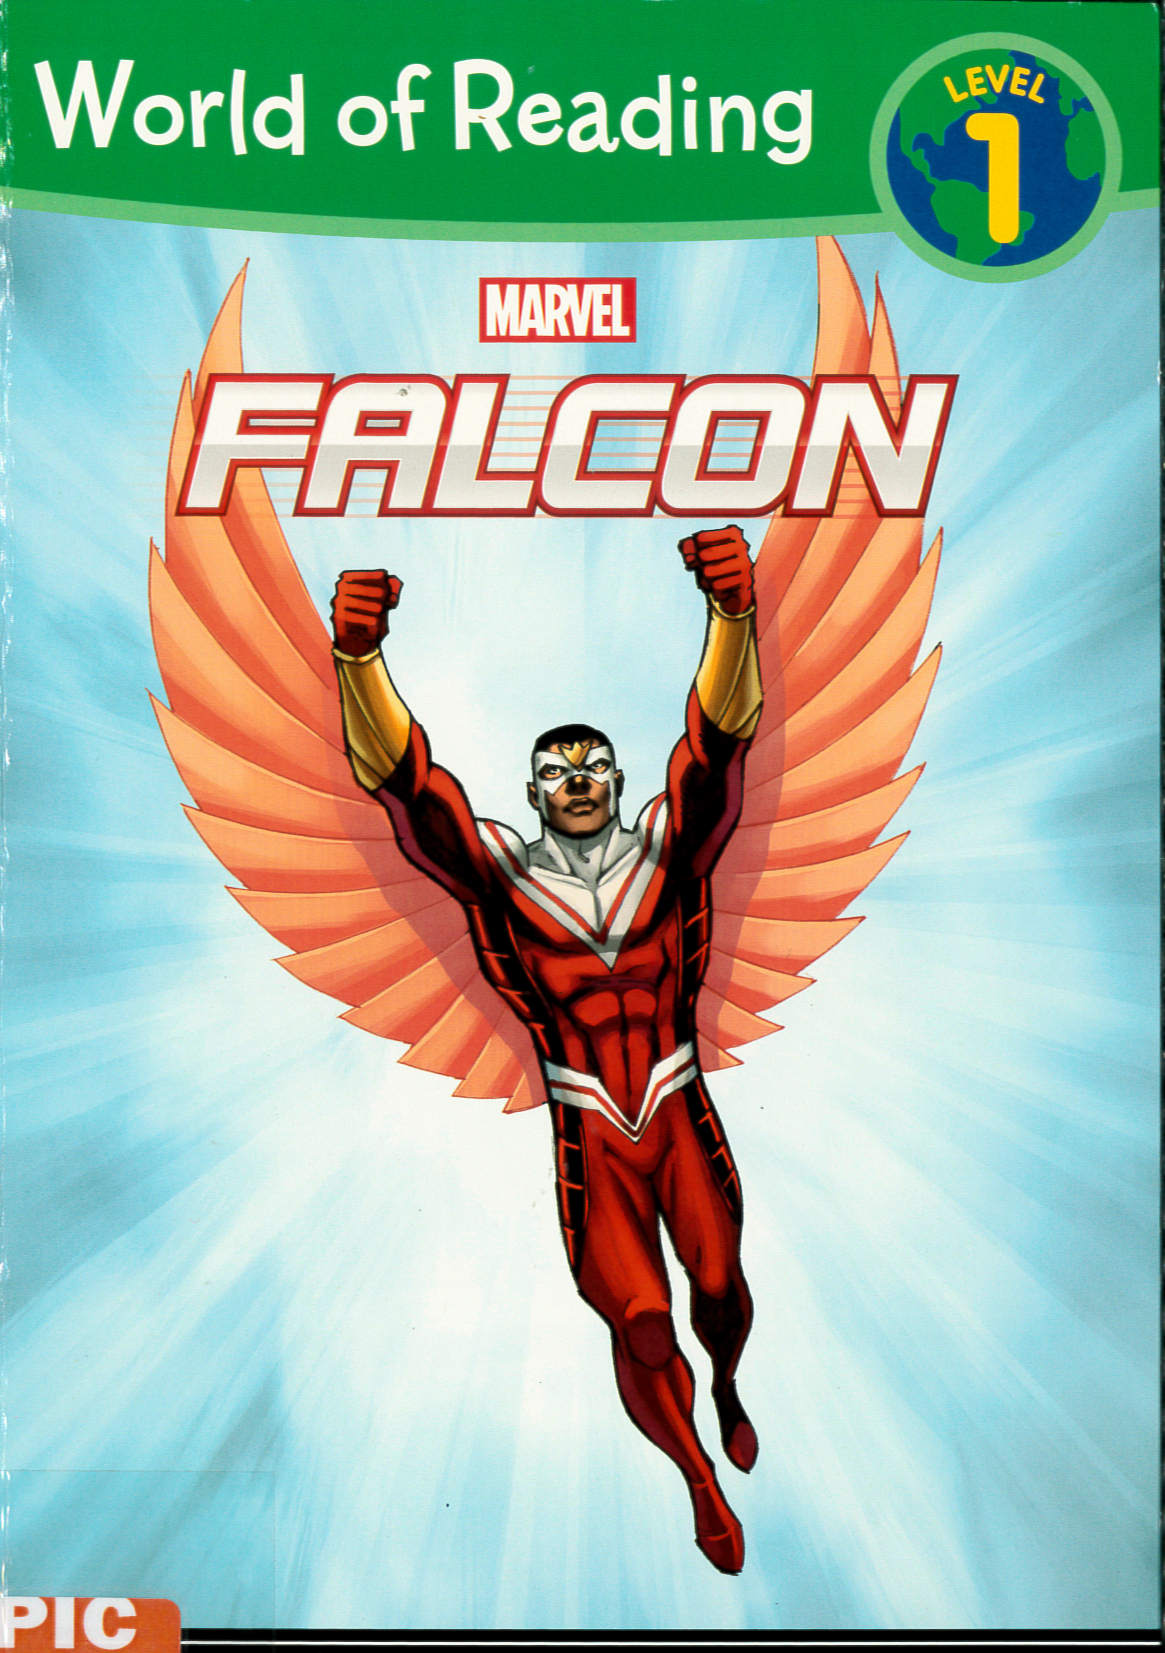 This is Falcon /